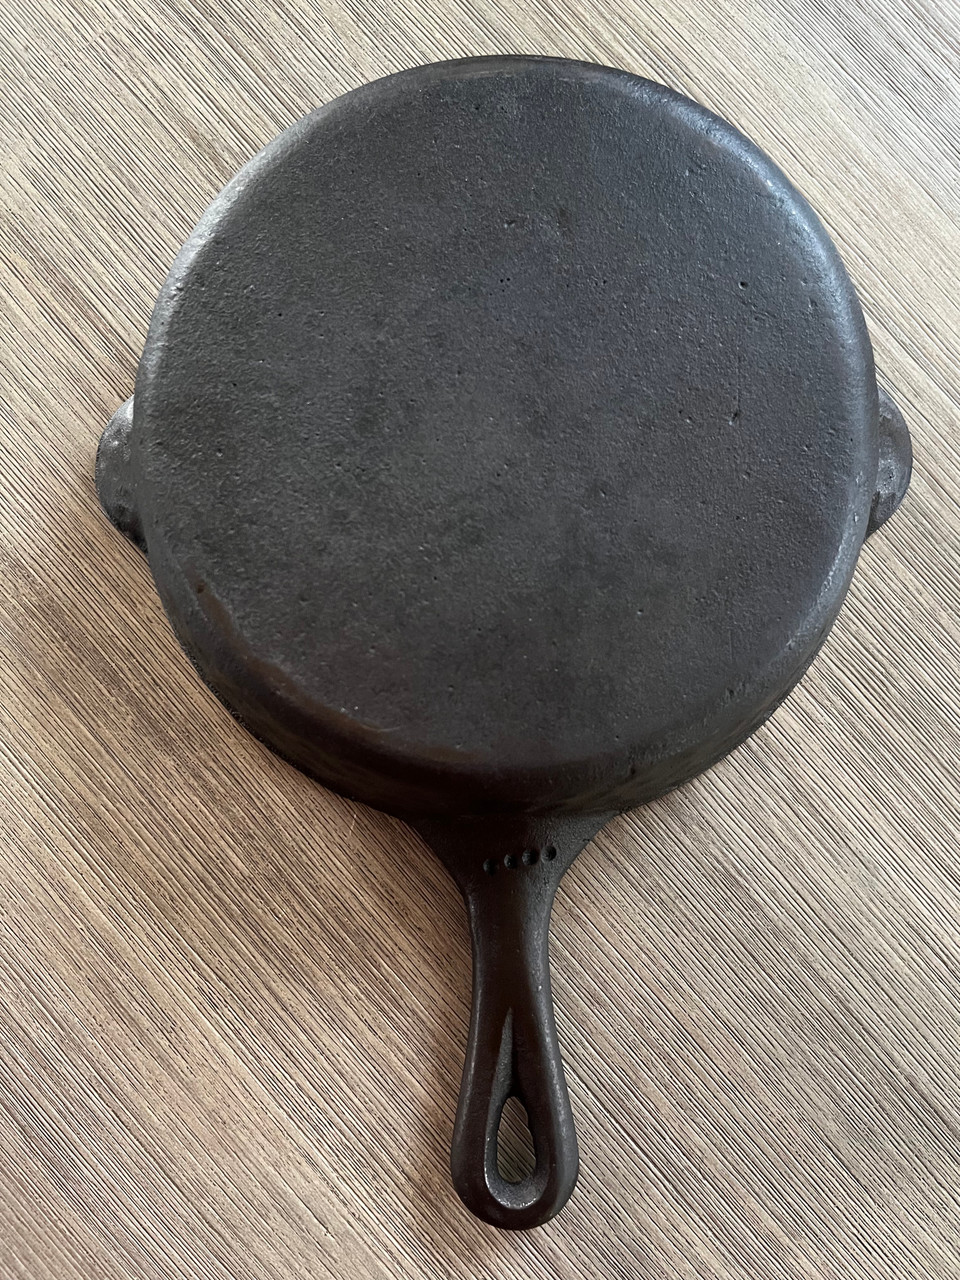 Toy Miniature Cast Iron Skillet, Hammered Ugly Style, Possibly Wagner Based  on Markings 